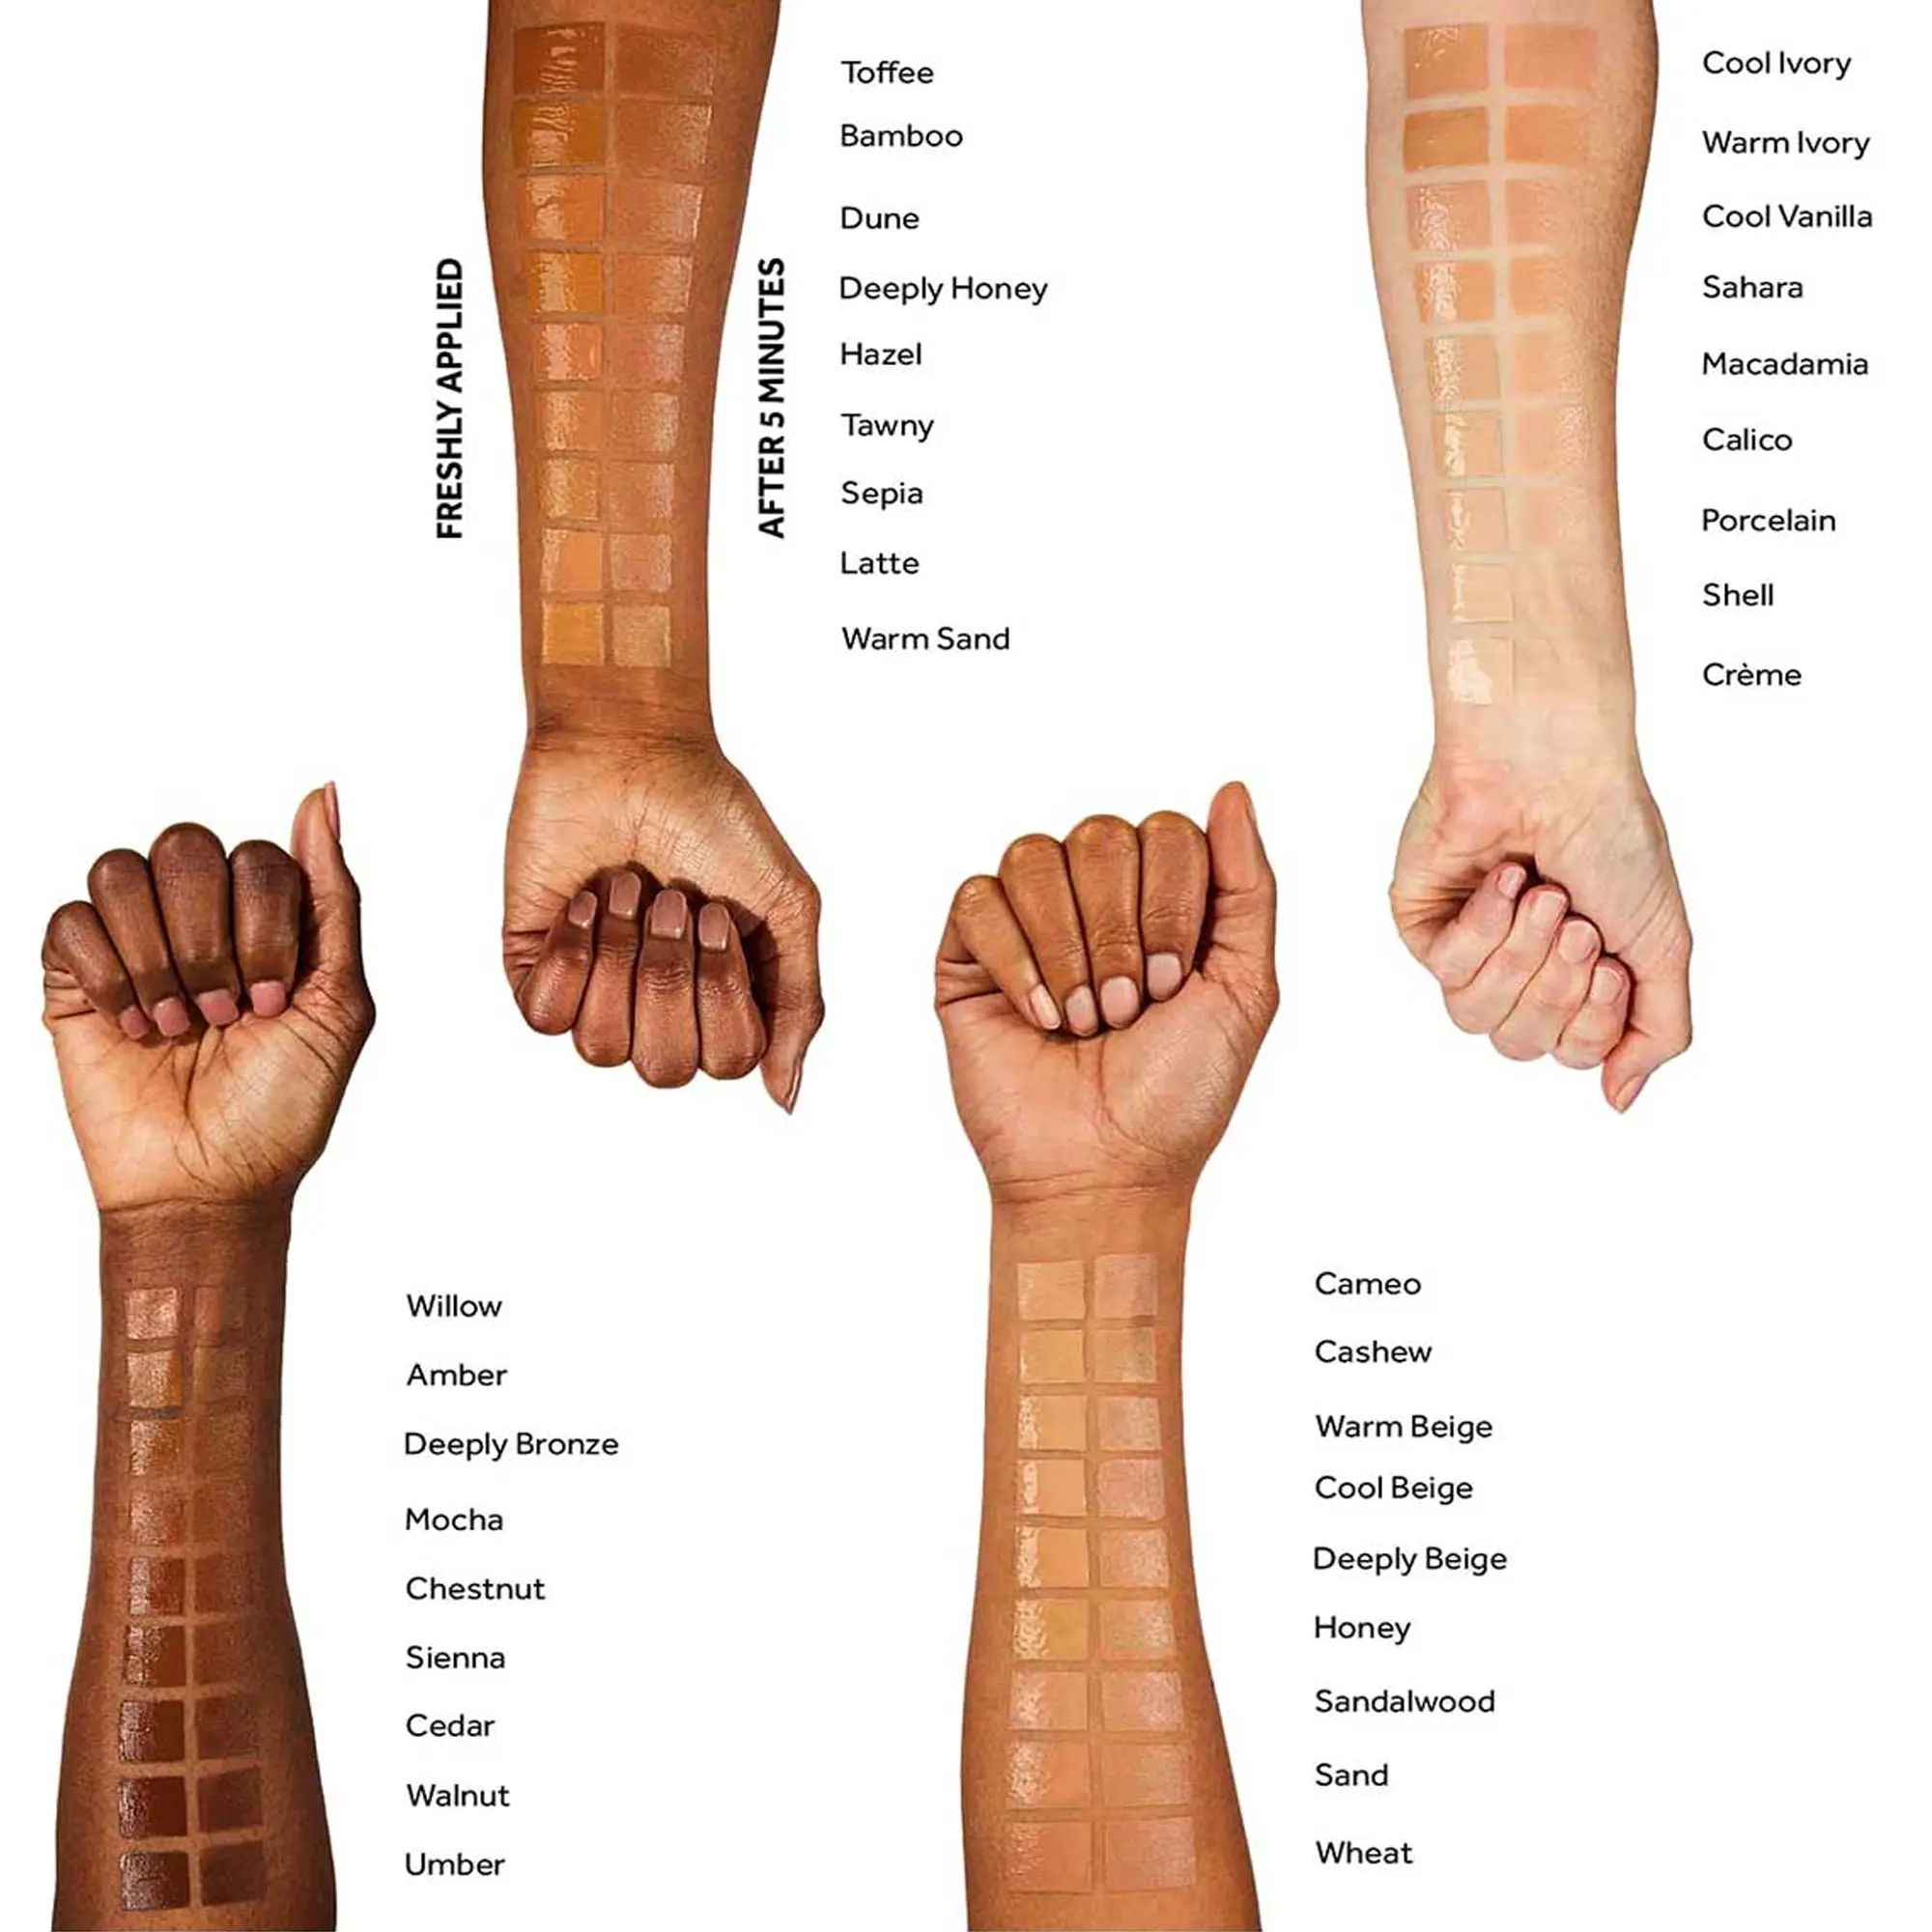 Image showing all the different shades applied in swatches on different skin colours with Freshly applied and After 5 minutes. Each Swatch has the relevant shade named next to it